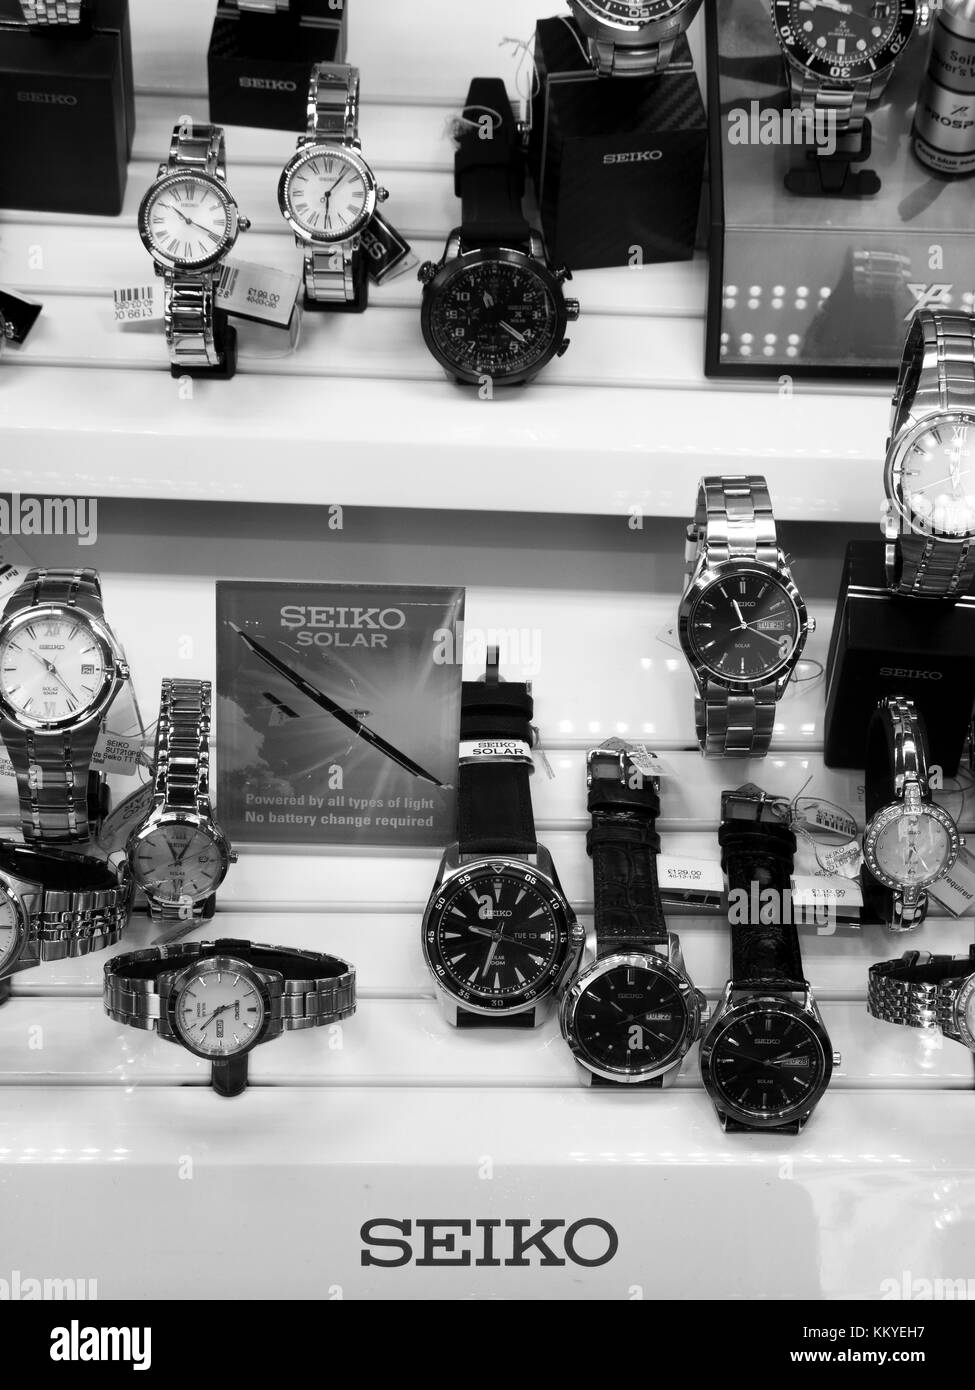 Seiko watch display in jewellers shop window, company founded in 1881 ...